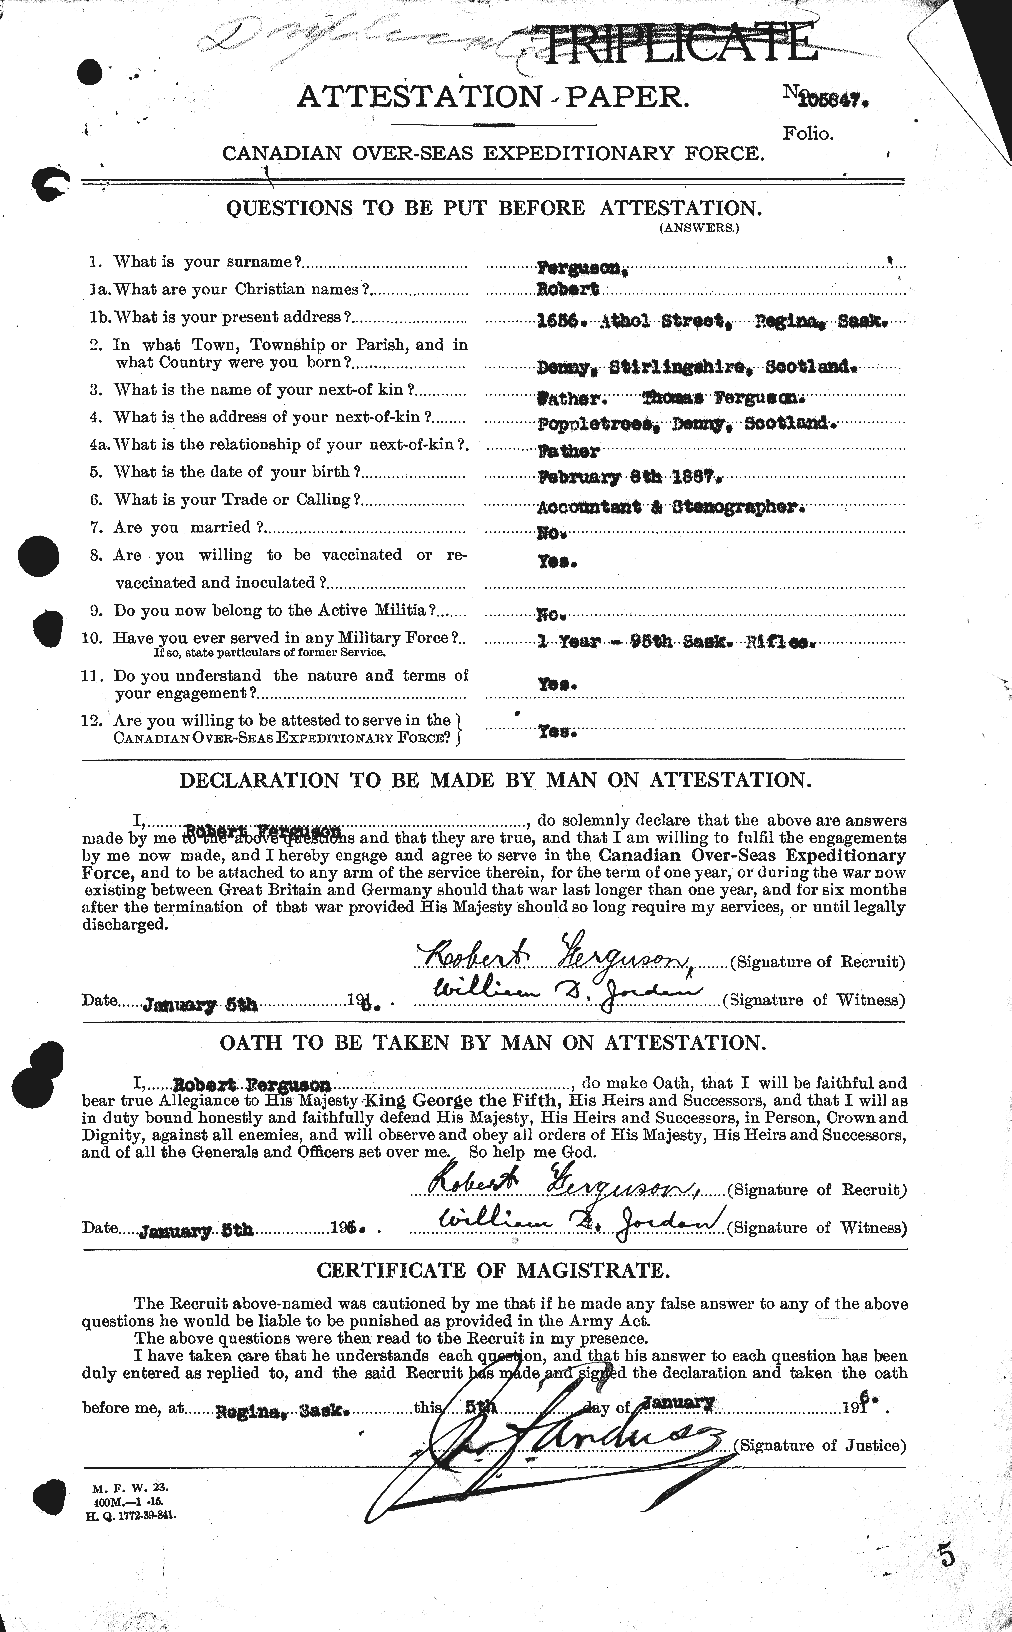 Personnel Records of the First World War - CEF 321228a